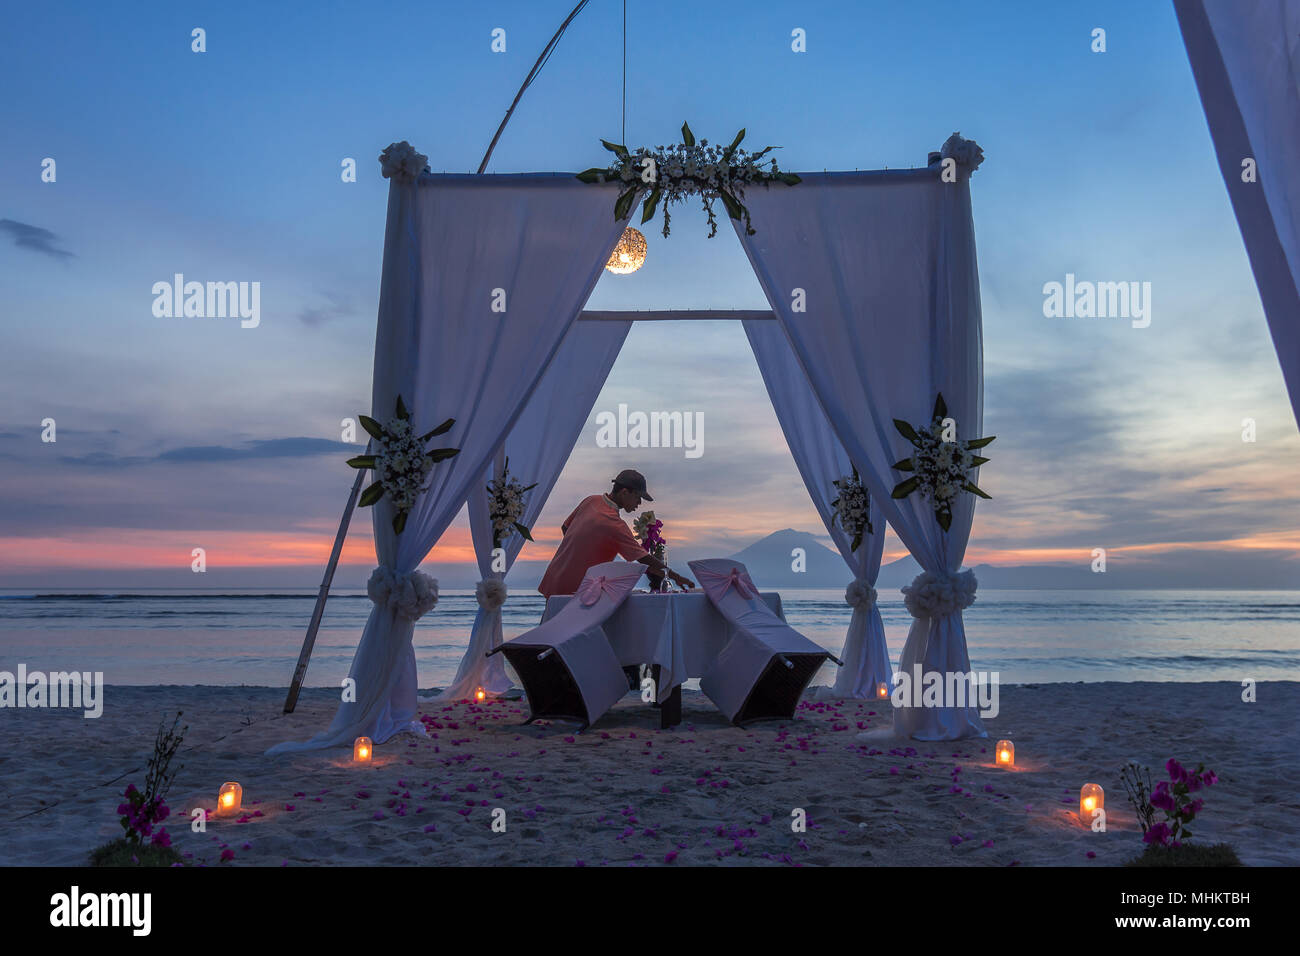 A seafront romantic dinner in the sunset during the blue hour is prepared by a boy in a cap, april 24, 2018, Gili Trawangan, Indonesia Stock Photo